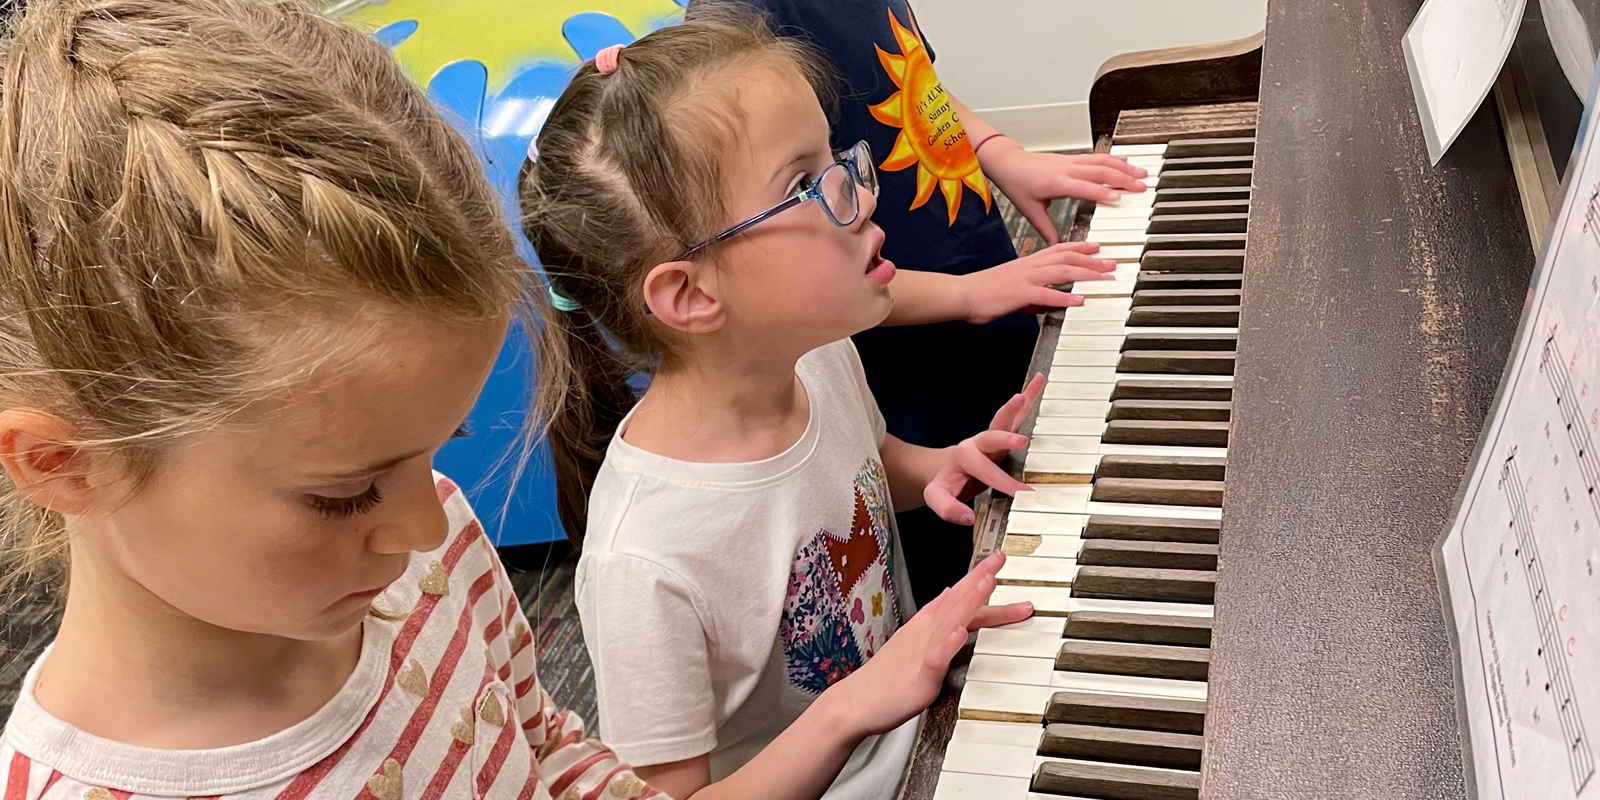 Young girl with blue-rimmed glasses and ponytail in between two other children playing piano